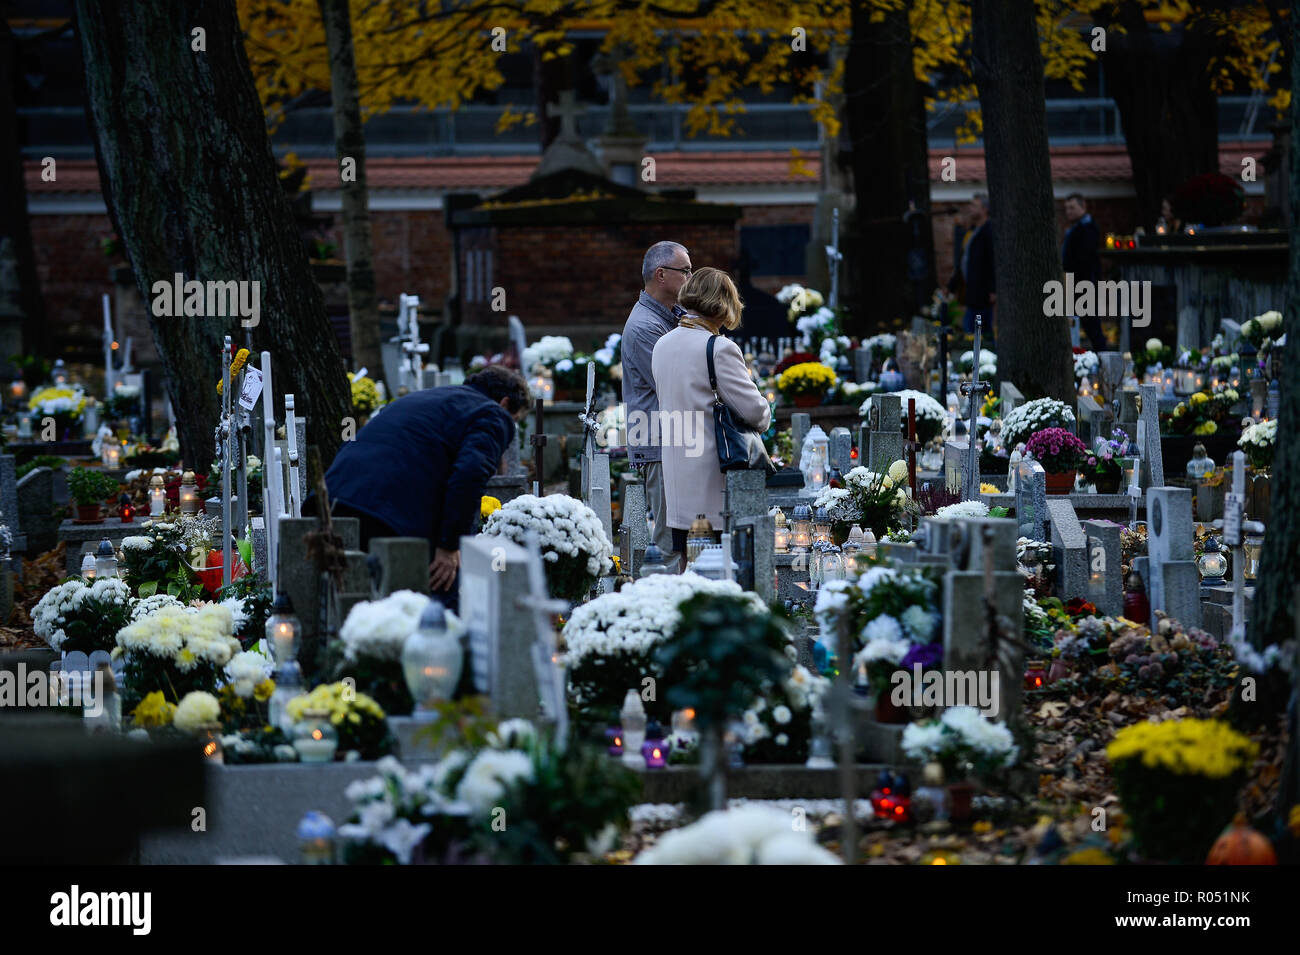 Krakow, Poland. 1st Nov, 2018. People are seen standing while praying next to a grave at the Rakowicki Cemetery during the celebrations.All Saints Day, also known as The Day of the Dead, is a Roman Catholic day of remembrance of friends and loved ones who have passed away. Credit: Omar Marques/SOPA Images/ZUMA Wire/Alamy Live News Stock Photo